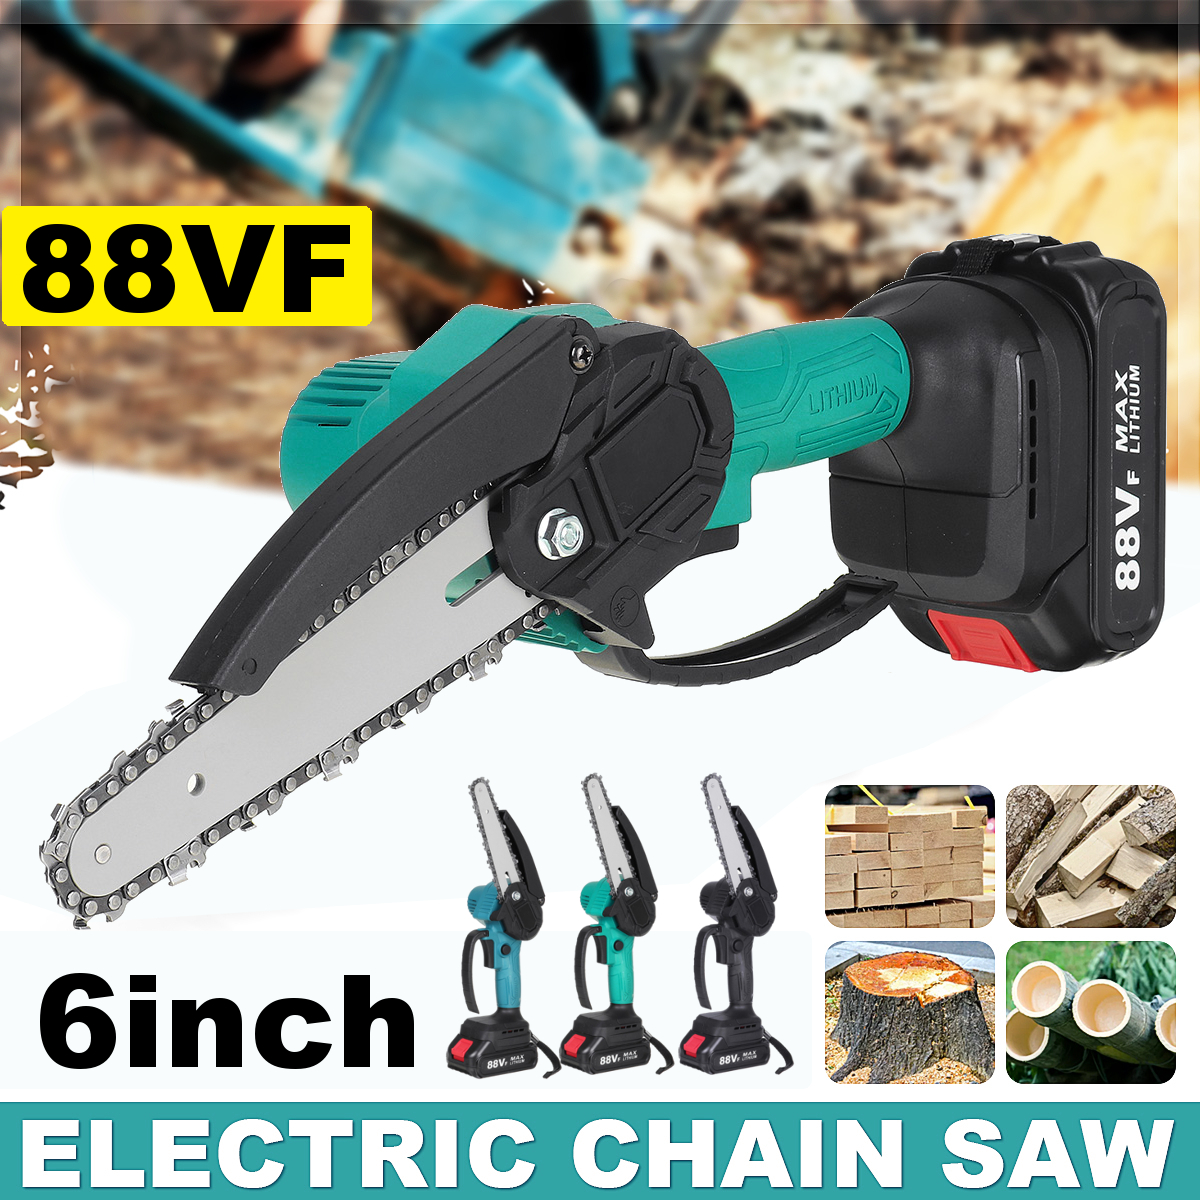 88VF-Electric-Saw-Cordless-6-Inch-One-Hand-Chain-Saws-Woodworking-Cutting-Tool-W-1-Battery-1855400-3